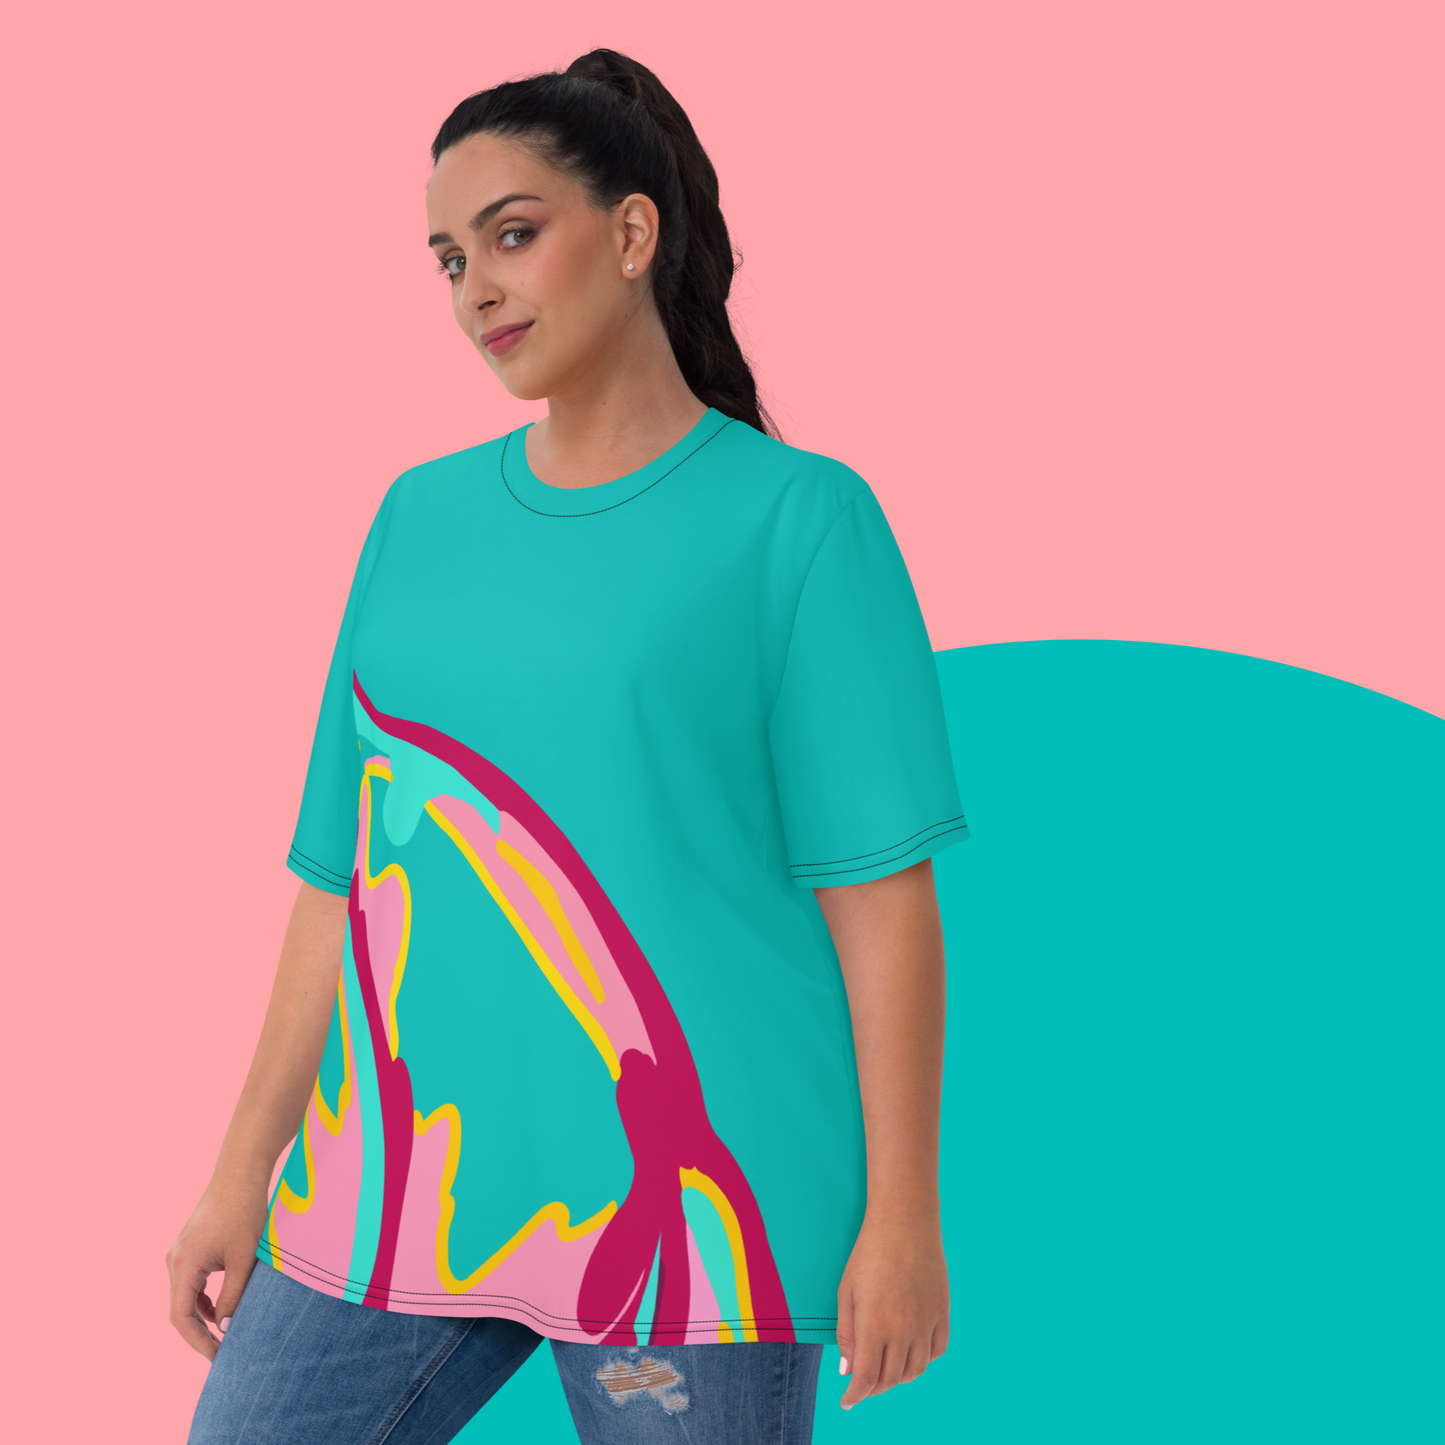 Embrace Body Love T-shirt- Teal (Femme fit)